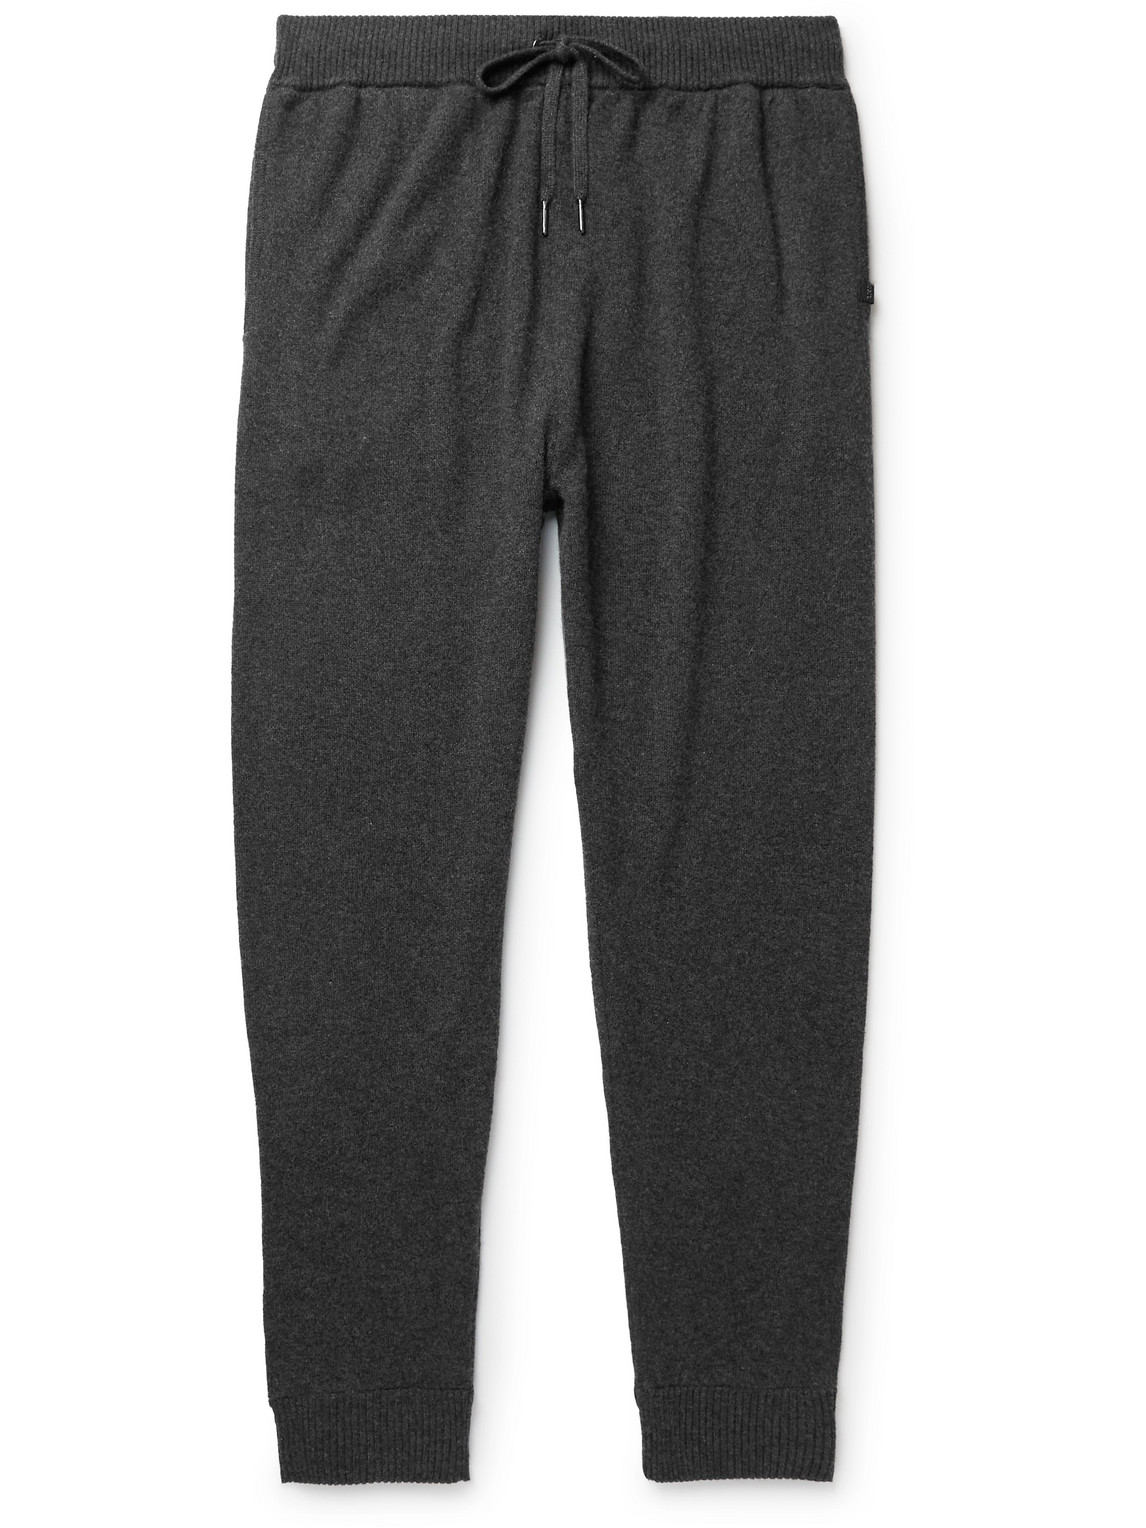 Derek Rose Finley 2 Tapered Cashmere Sweatpants In Gray | ModeSens